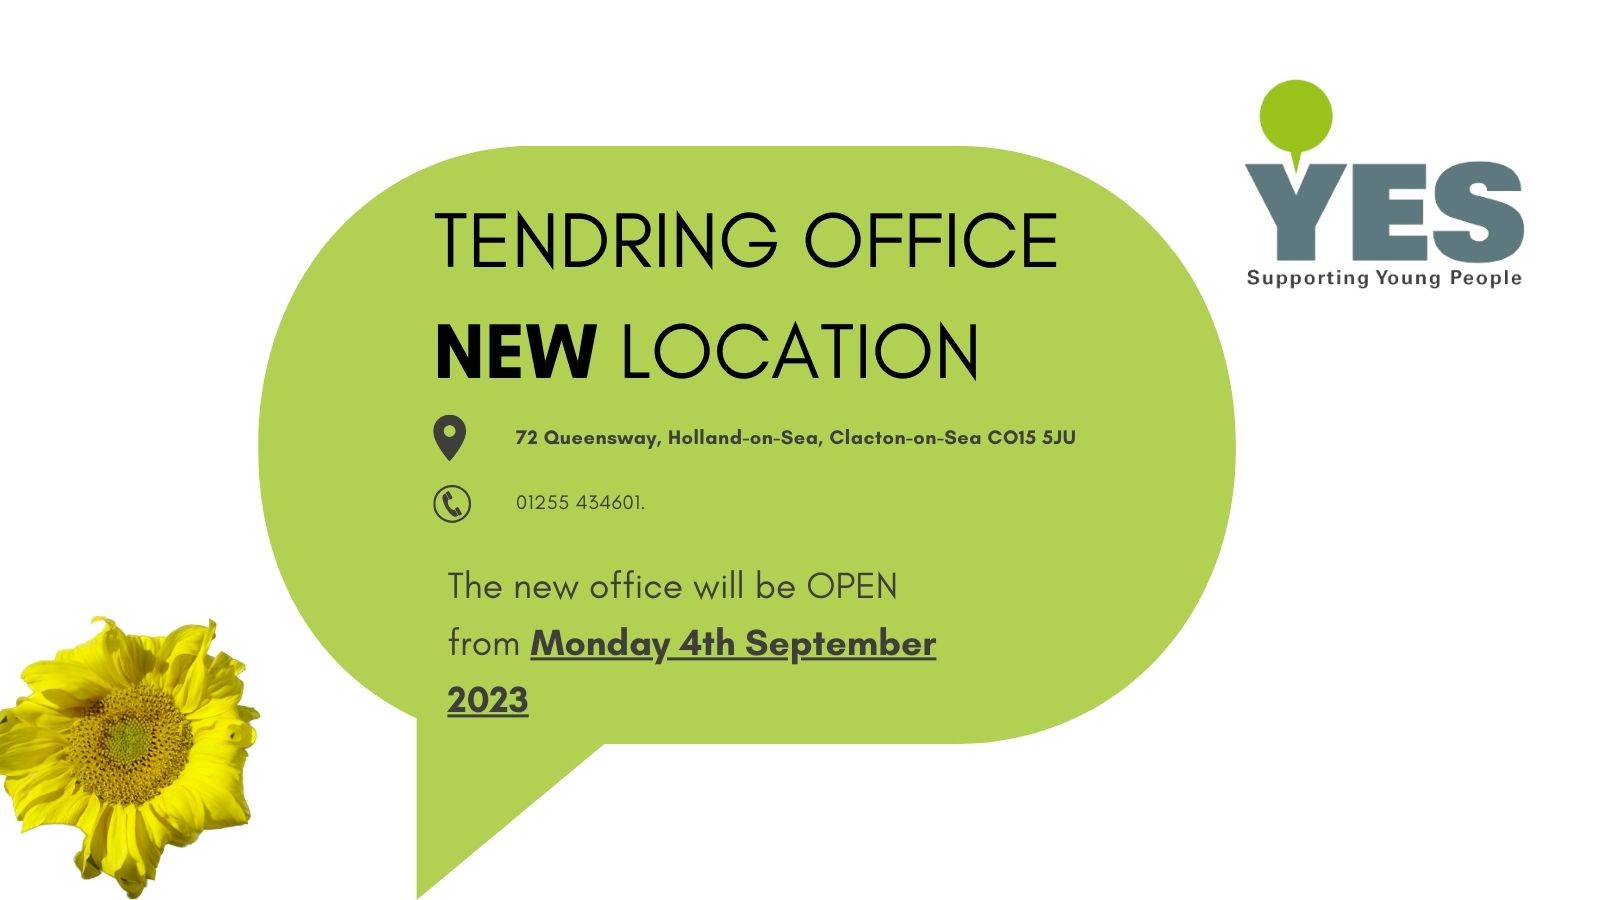 YES TENDRING NEW OFFICE LOCATION